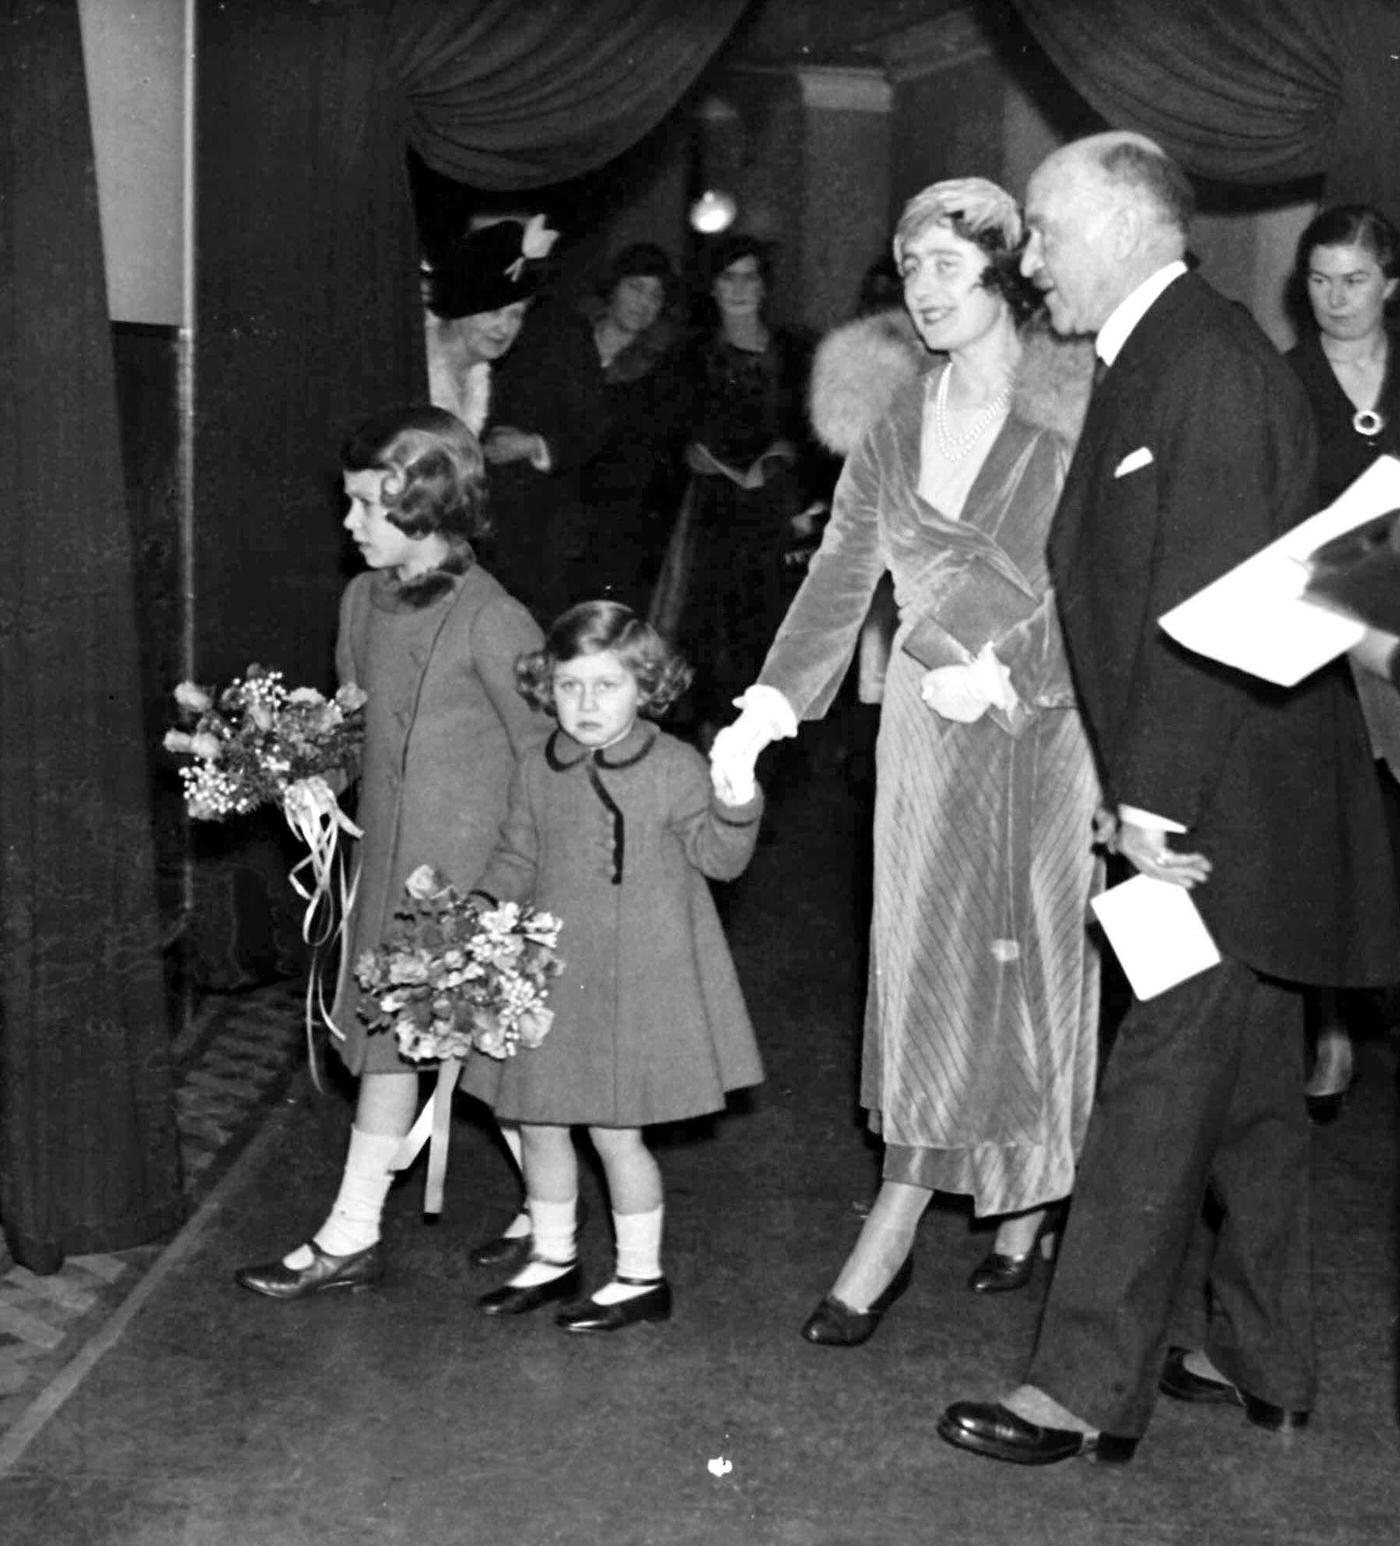 The Duchess of York (later the Queen Mother) arriving at London's Albert Hall with Princess Elizabeth and Princess Margaret to attend the Royal Choral Society's Christmas concert.